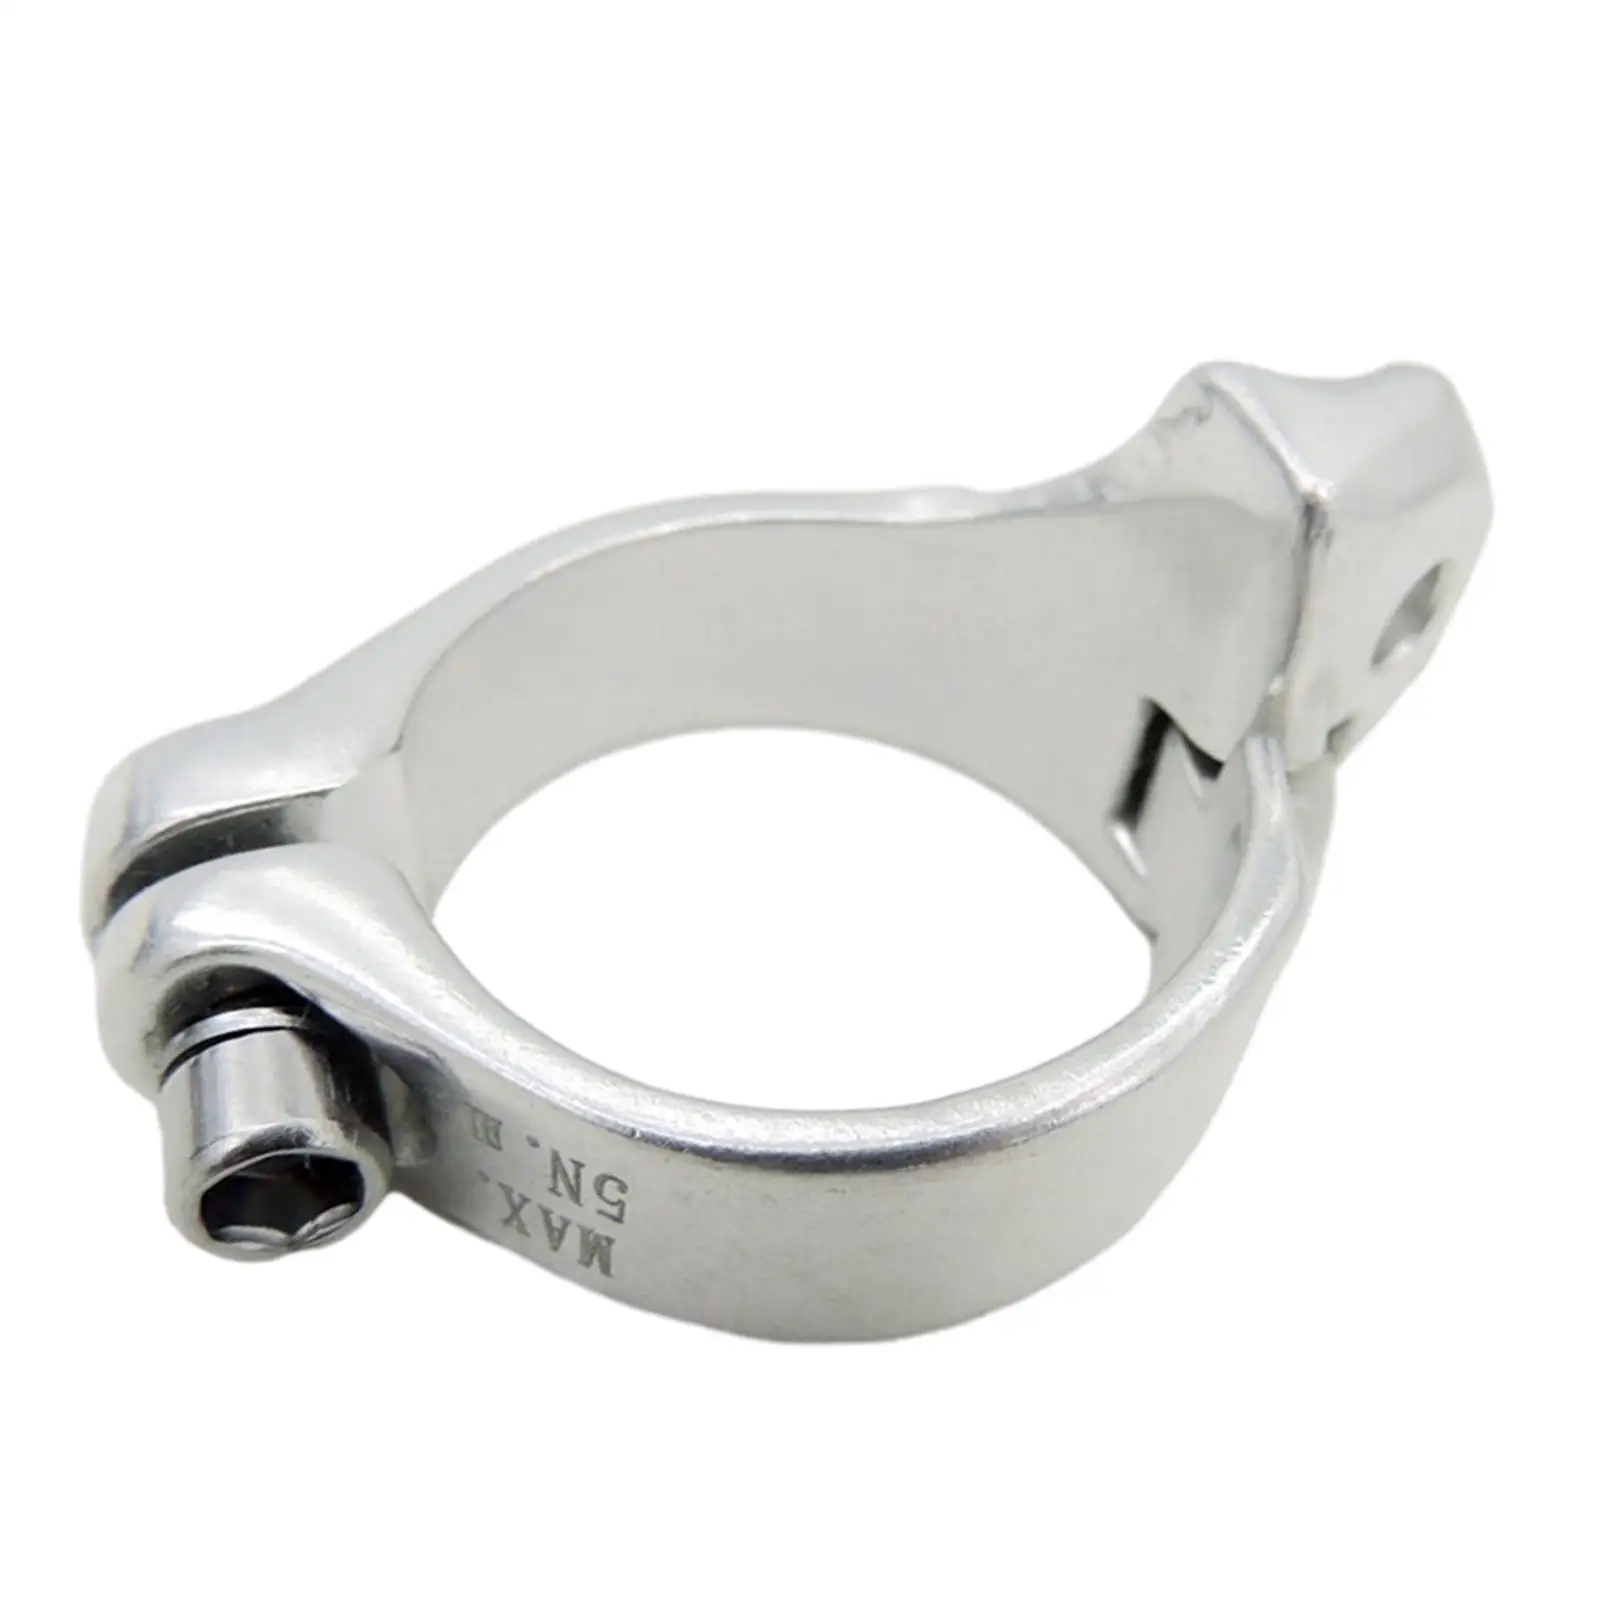 Bicycle Front Derailleur Clamp Aluminium Alloy Convertor Universal Bike Derailleur Clamp Adapter Clip for Road or Mountain Bike